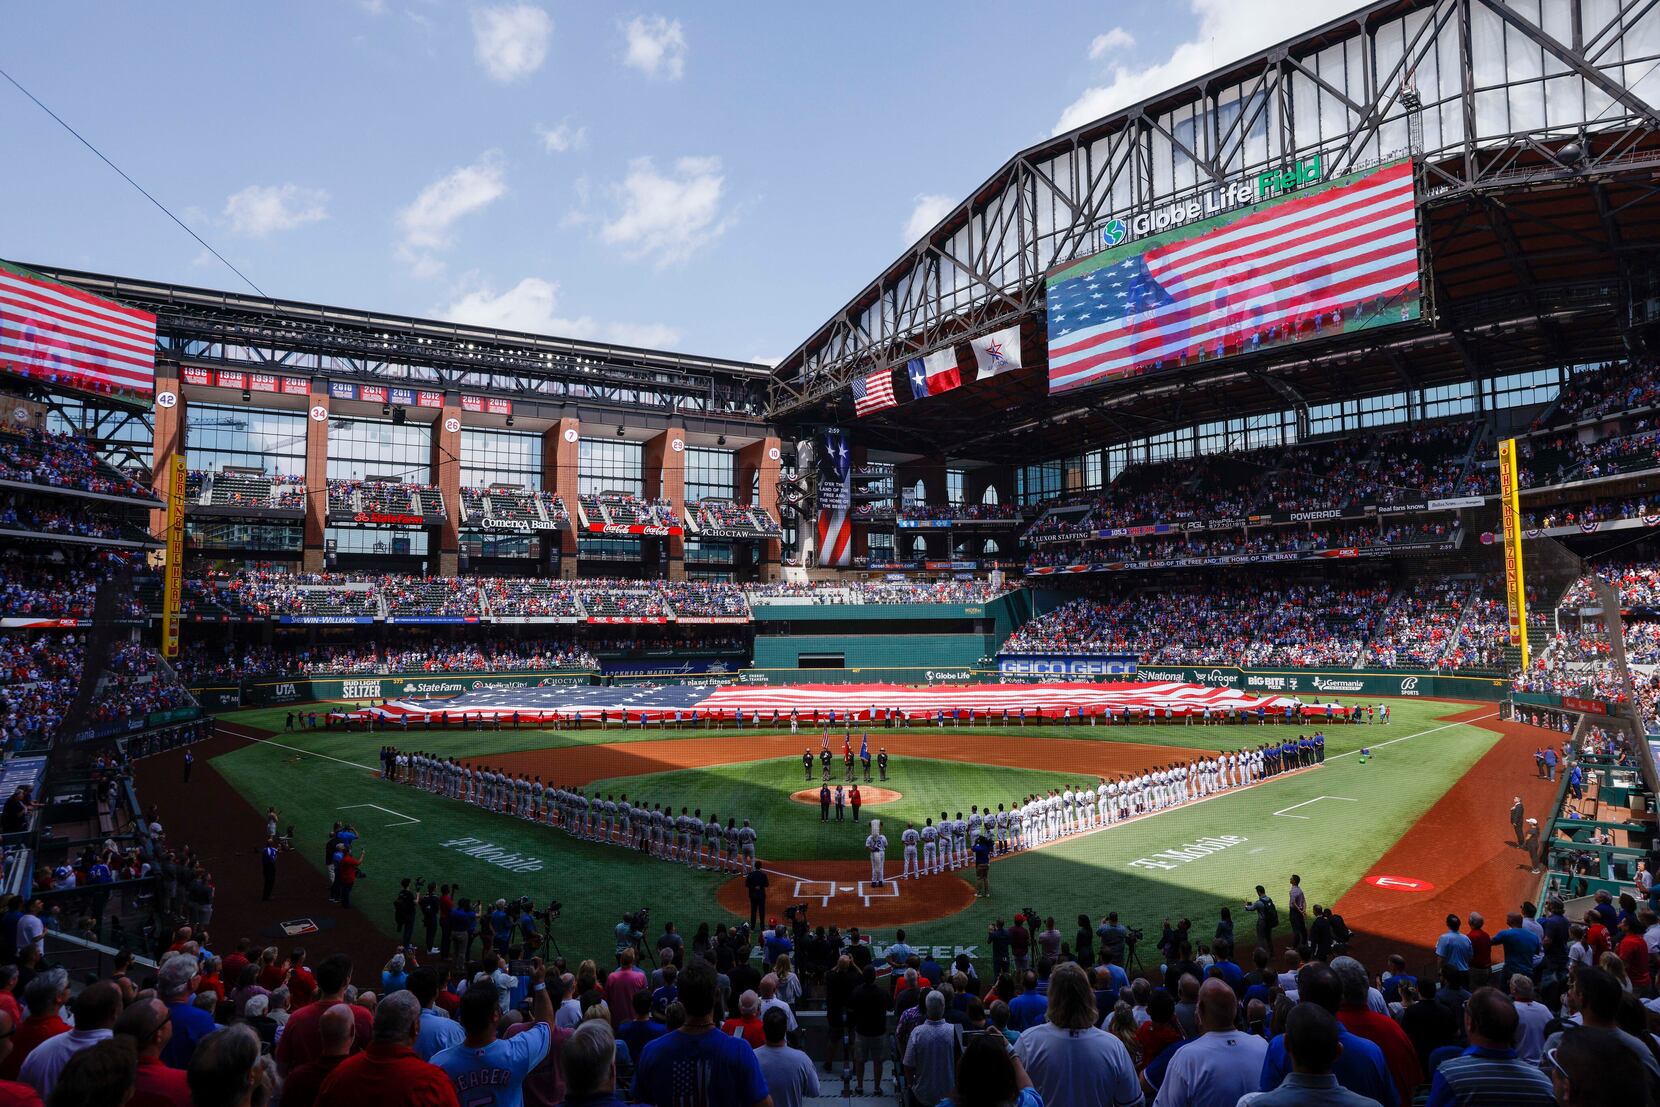 Texas Rangers fans 'attend' Opening Day in cardboard form